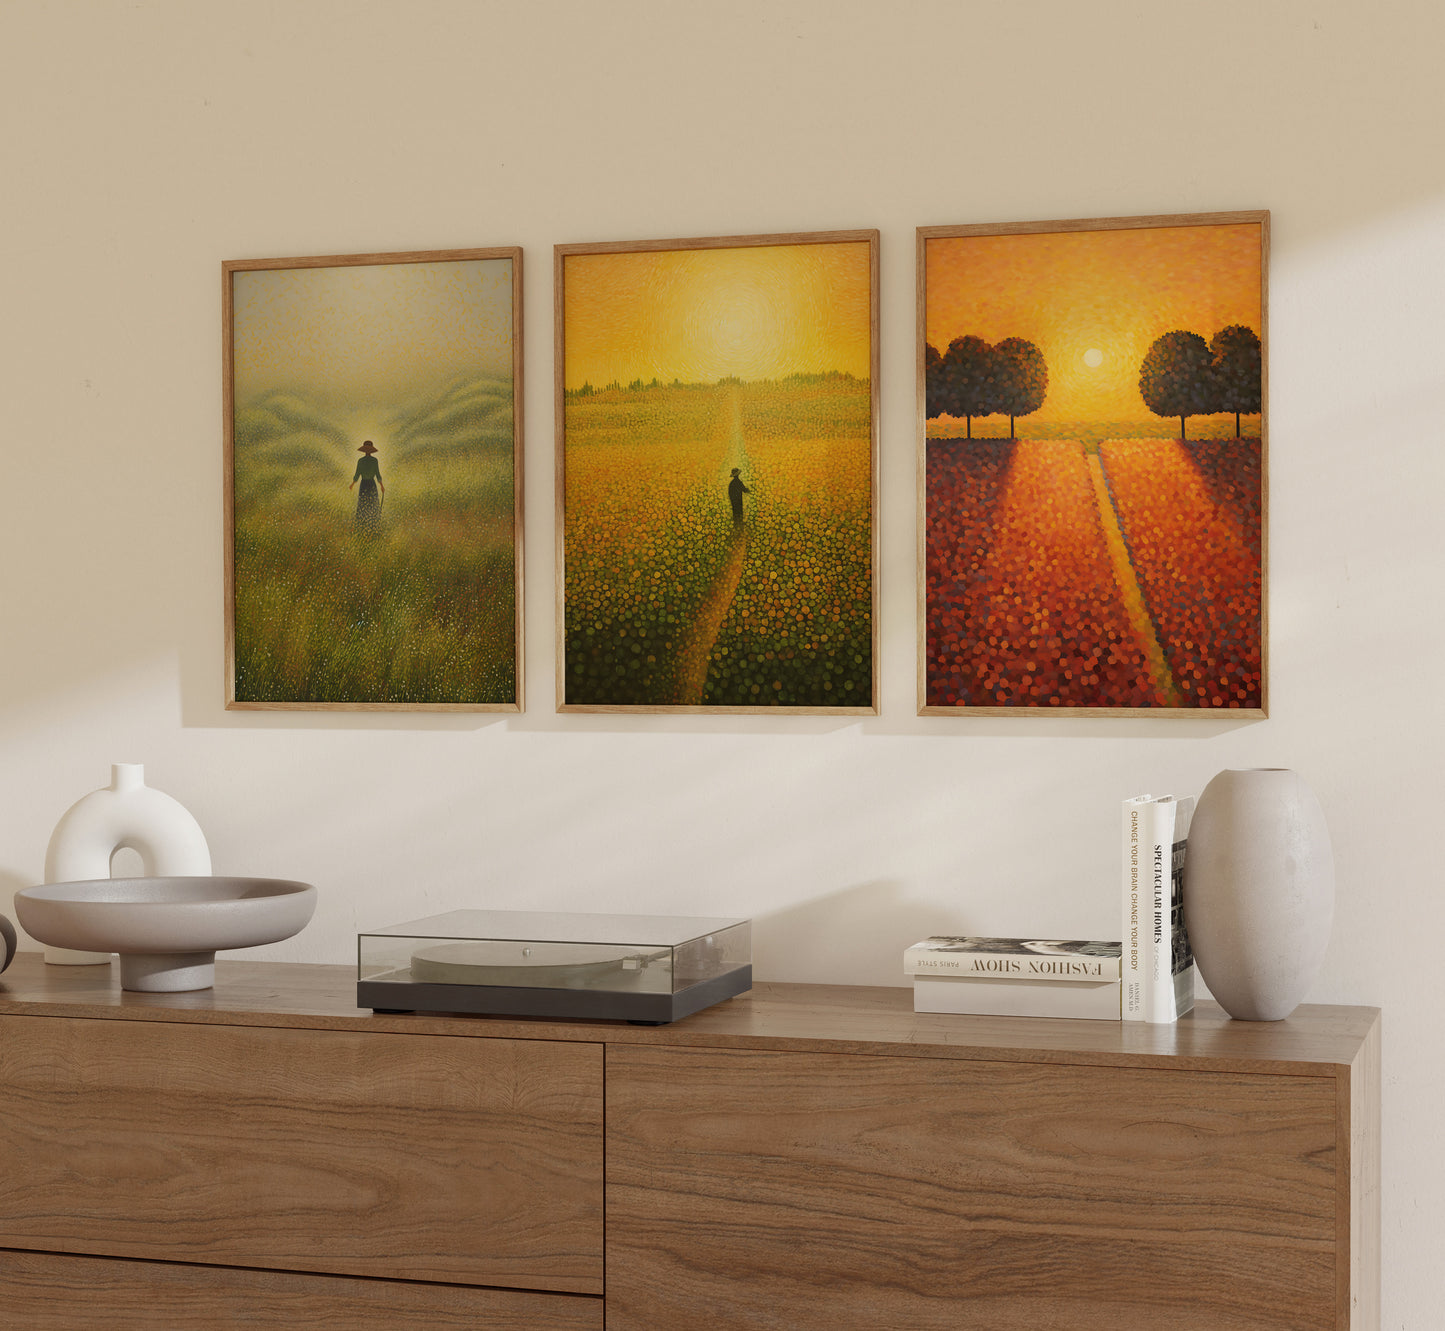 Three landscape paintings on a wall, depicting scenes with fields and a setting sun.